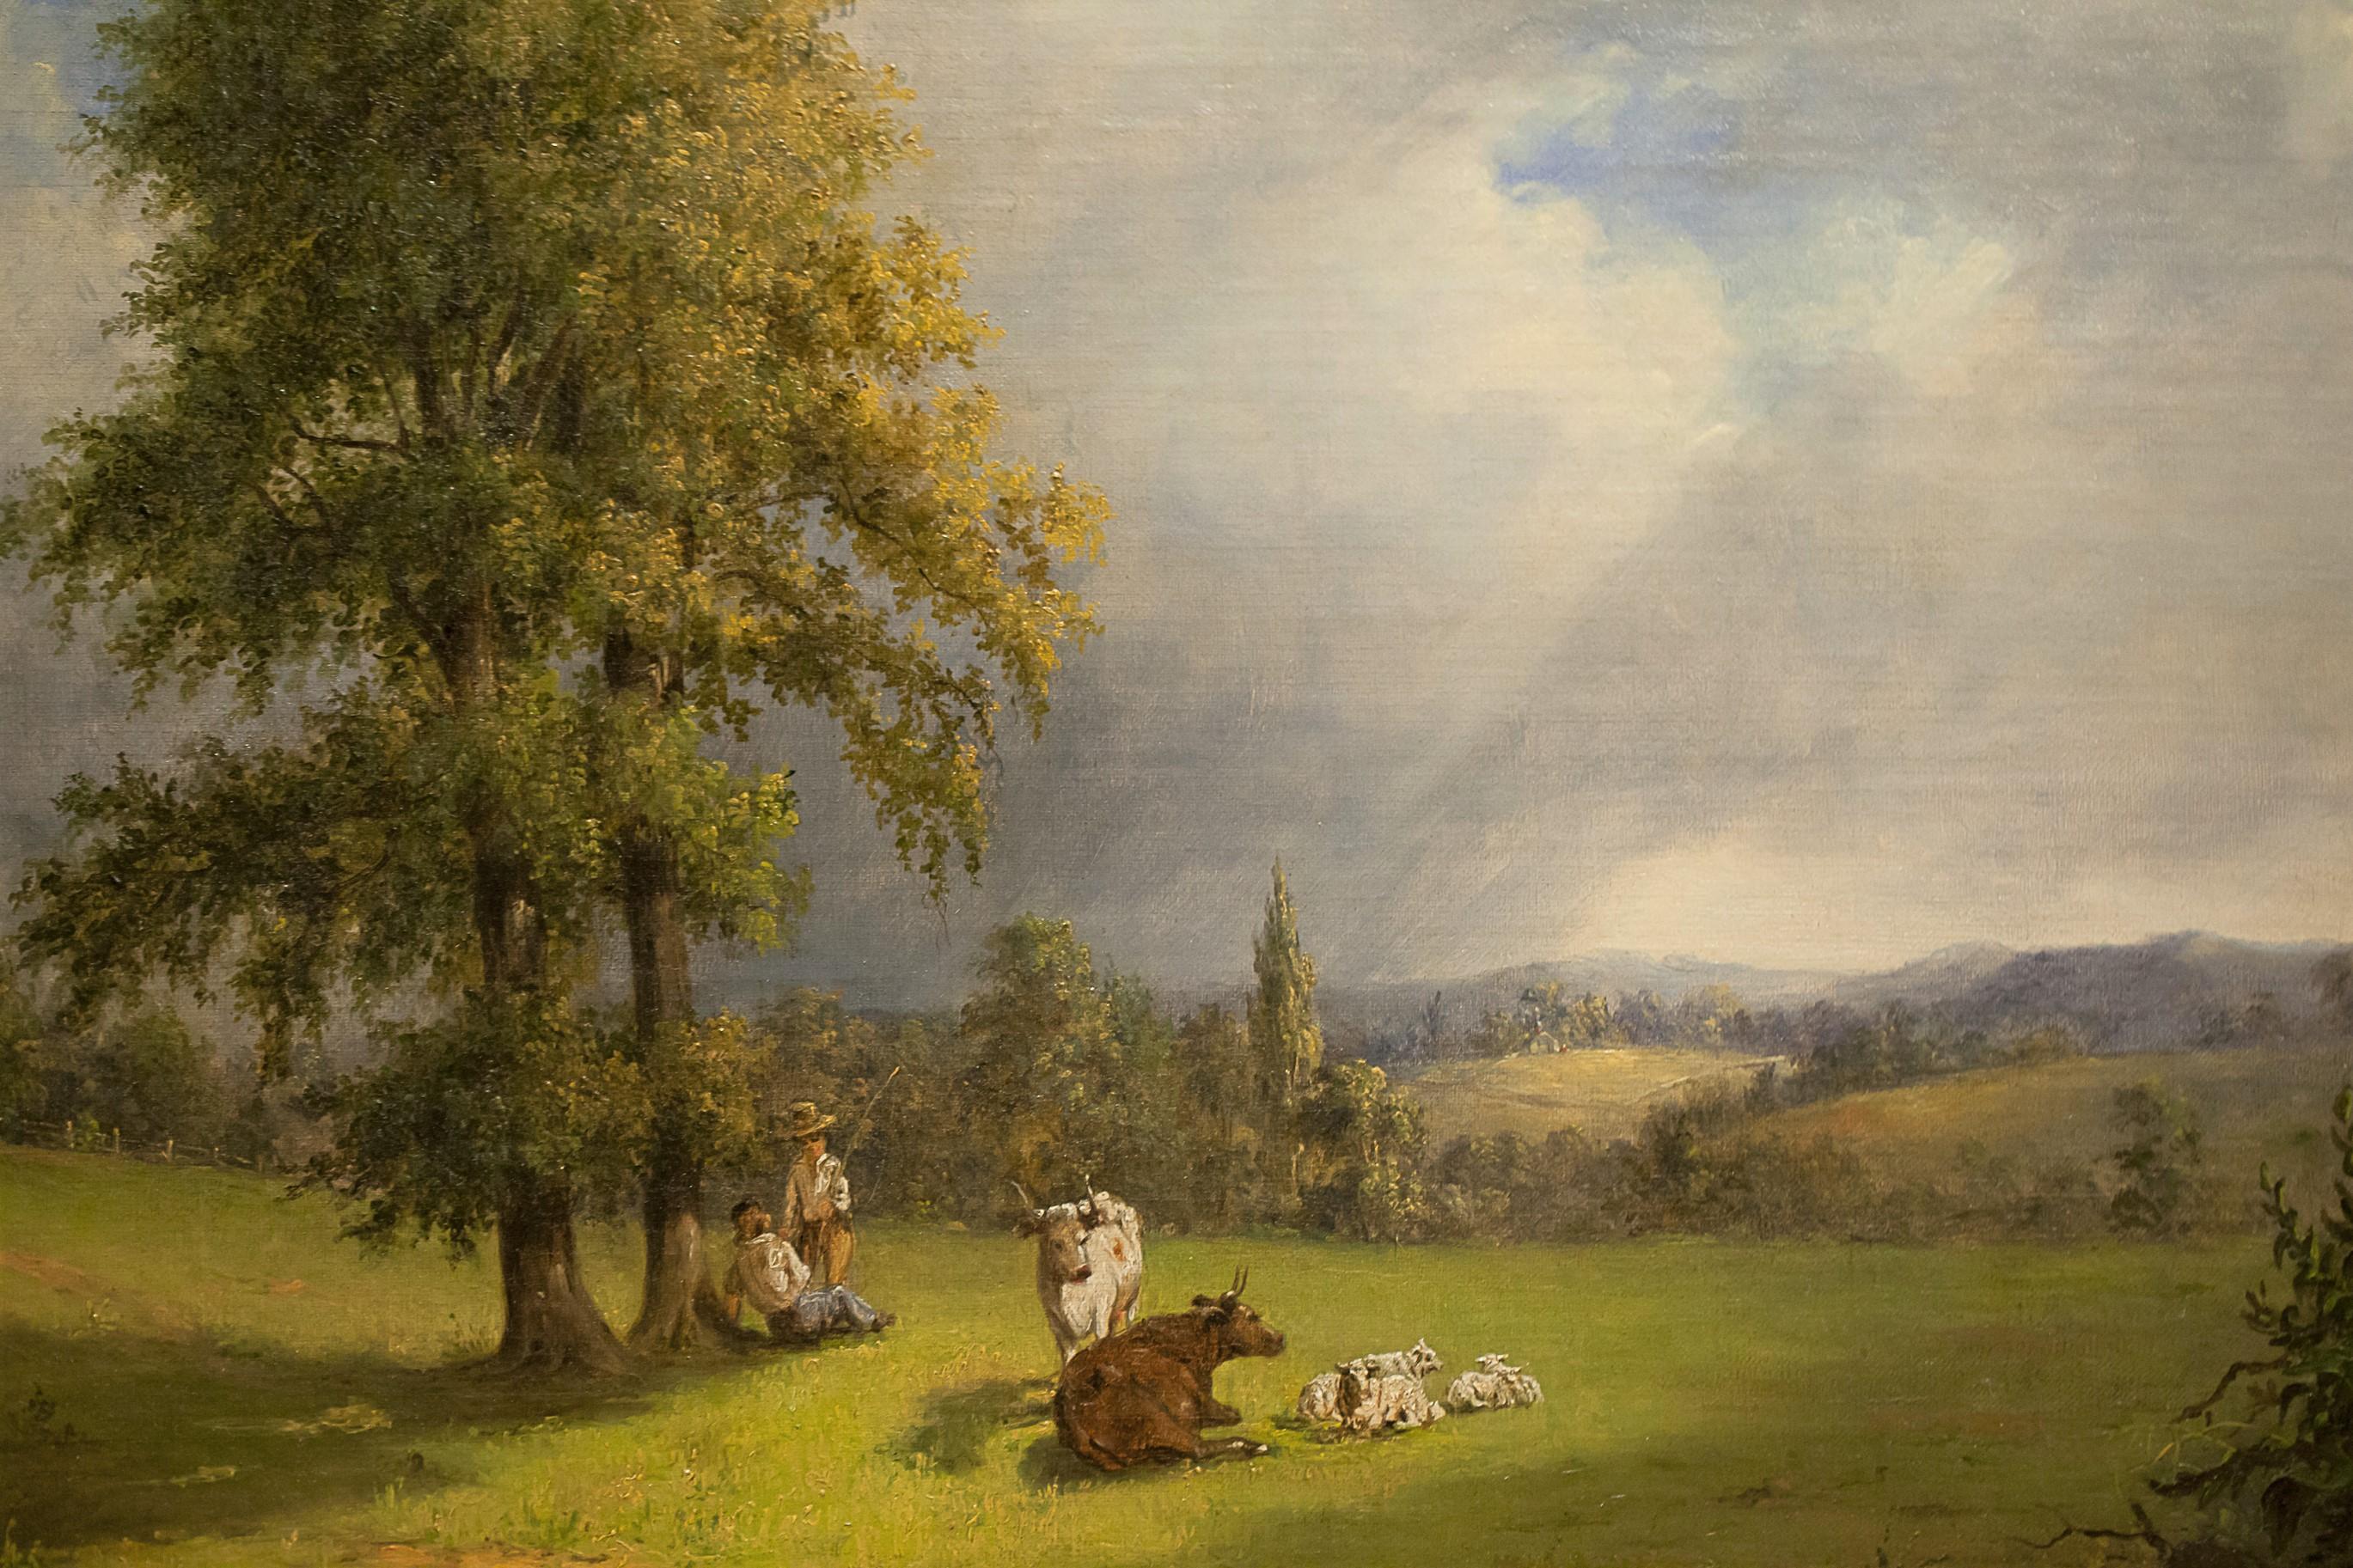 A bucolic scene of a pasture, probably in Pennsylvania, with two people and several cows and calves in a rolling landscape with one large tree in the foreground and a partly-cloudy sky. This painting was previously sold by the Vose Galleries of